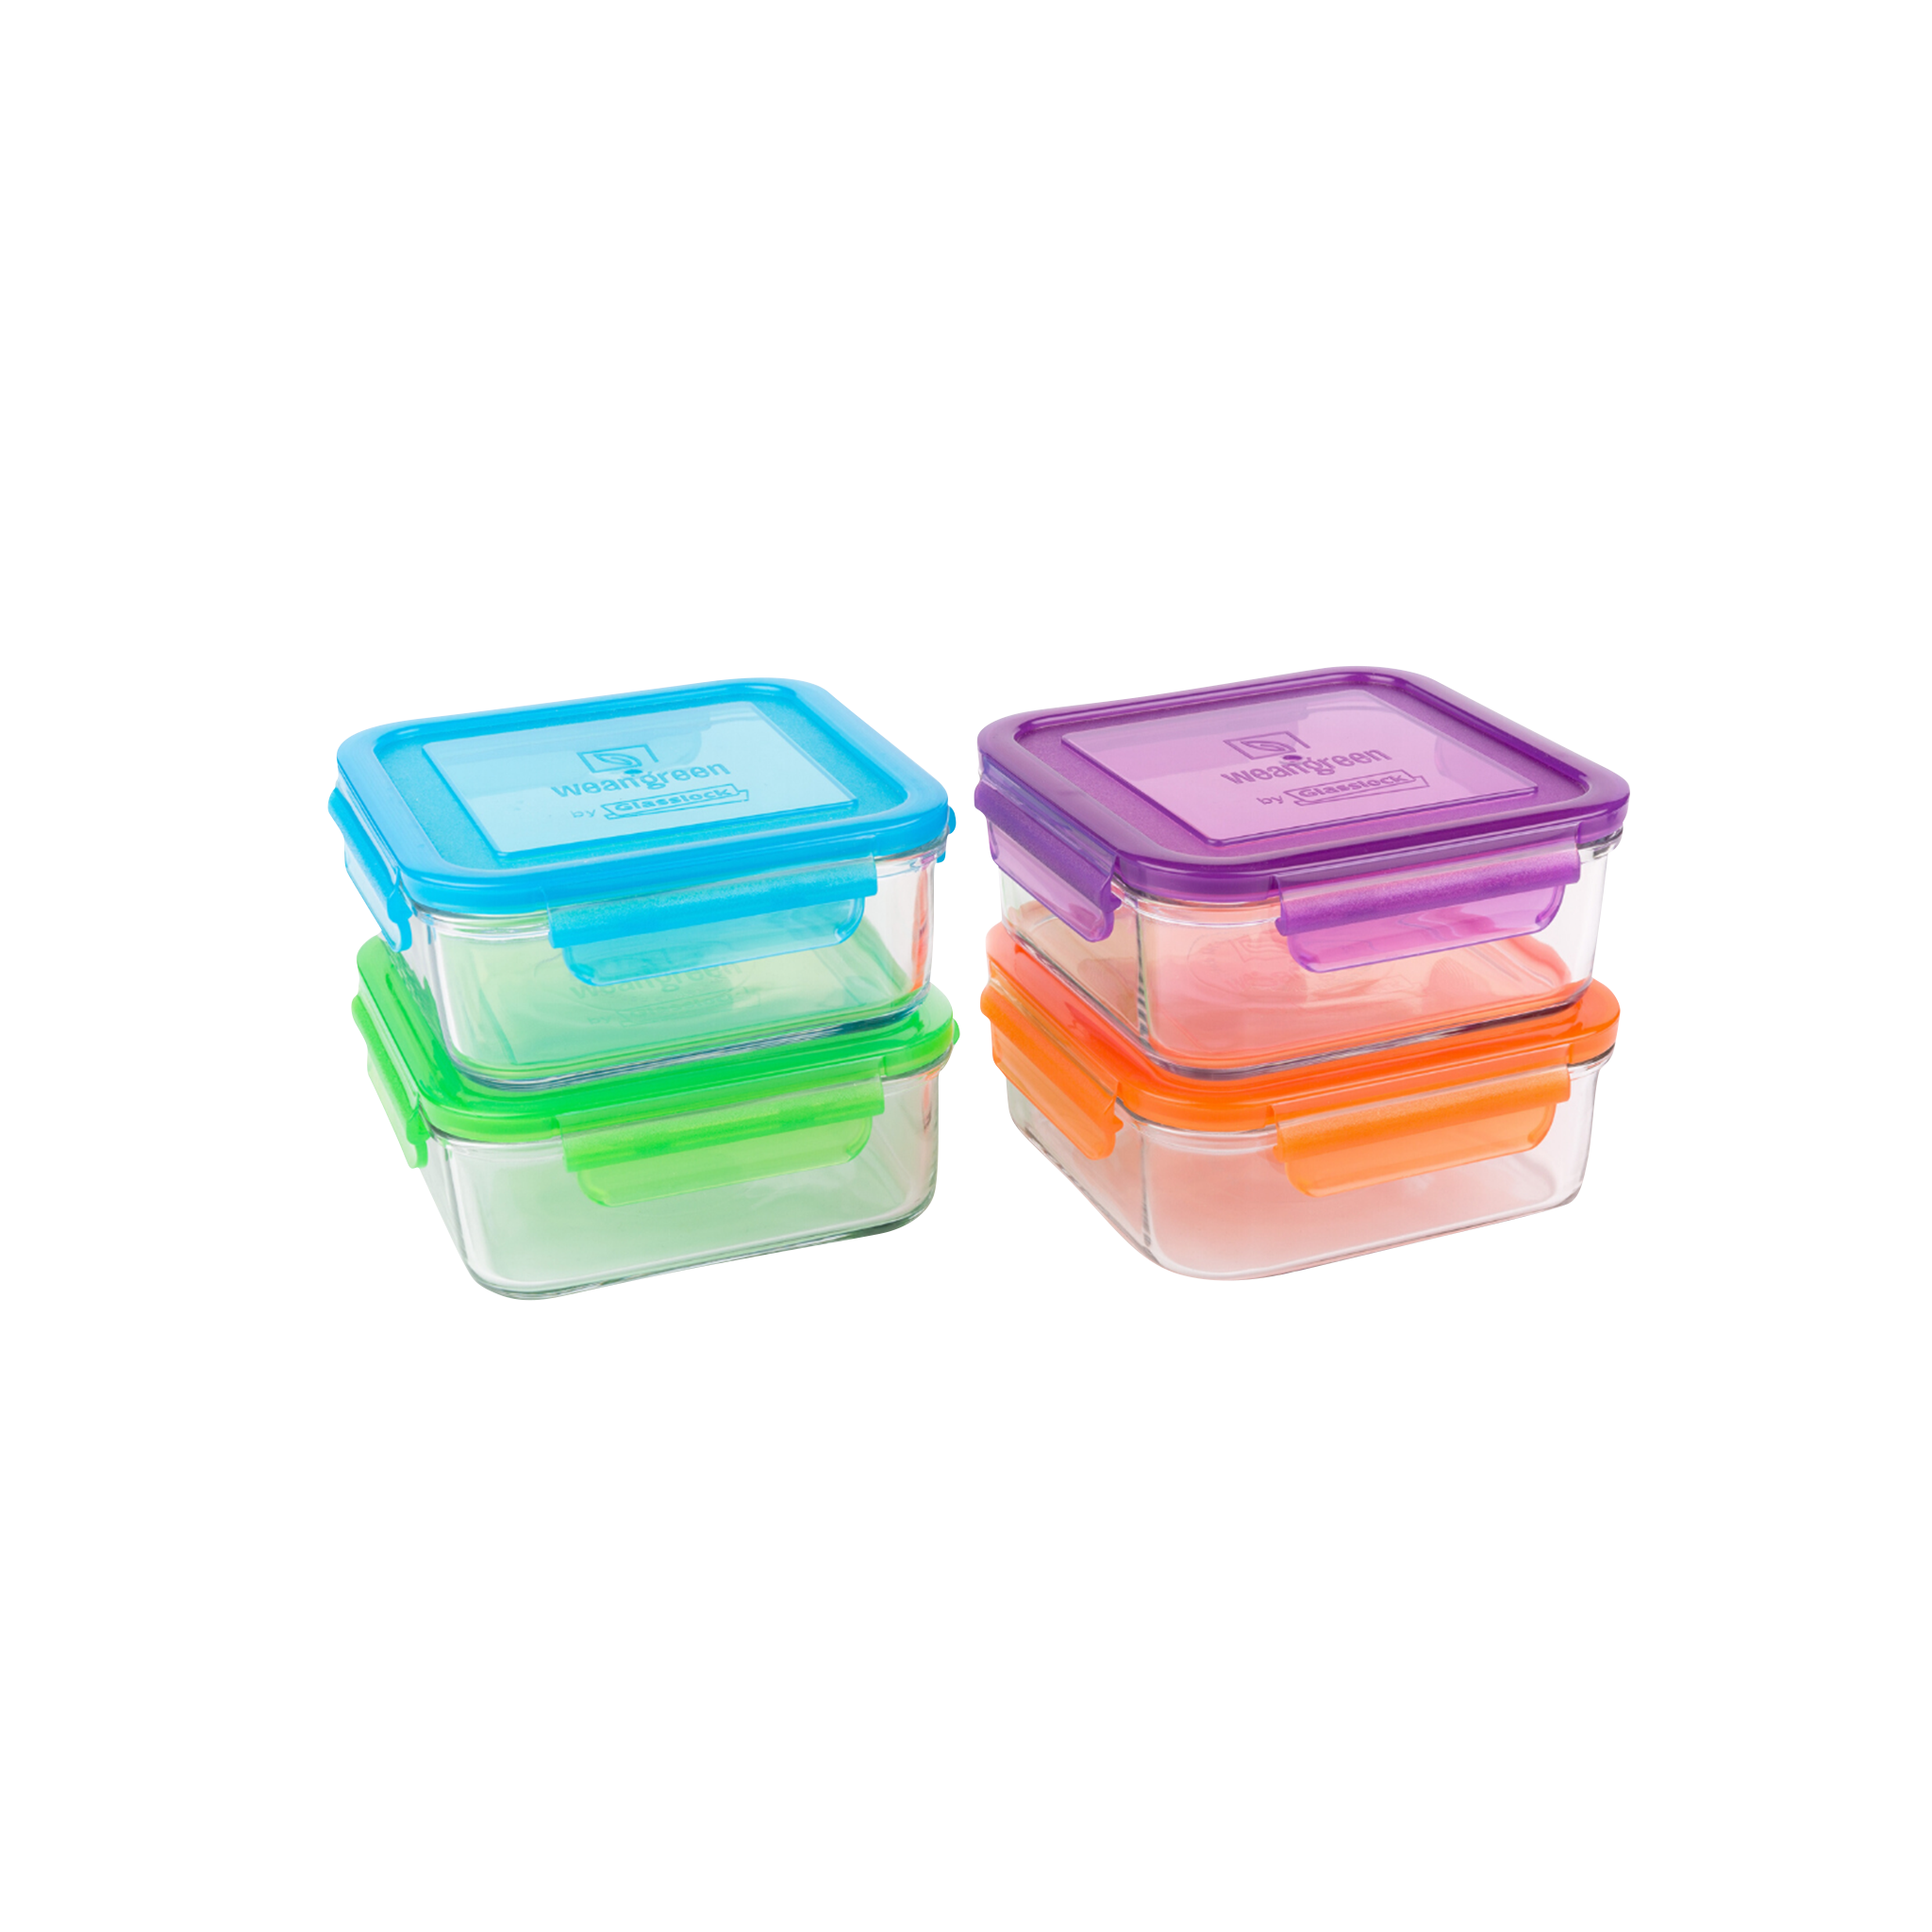 Meal Cube - 31 Oz